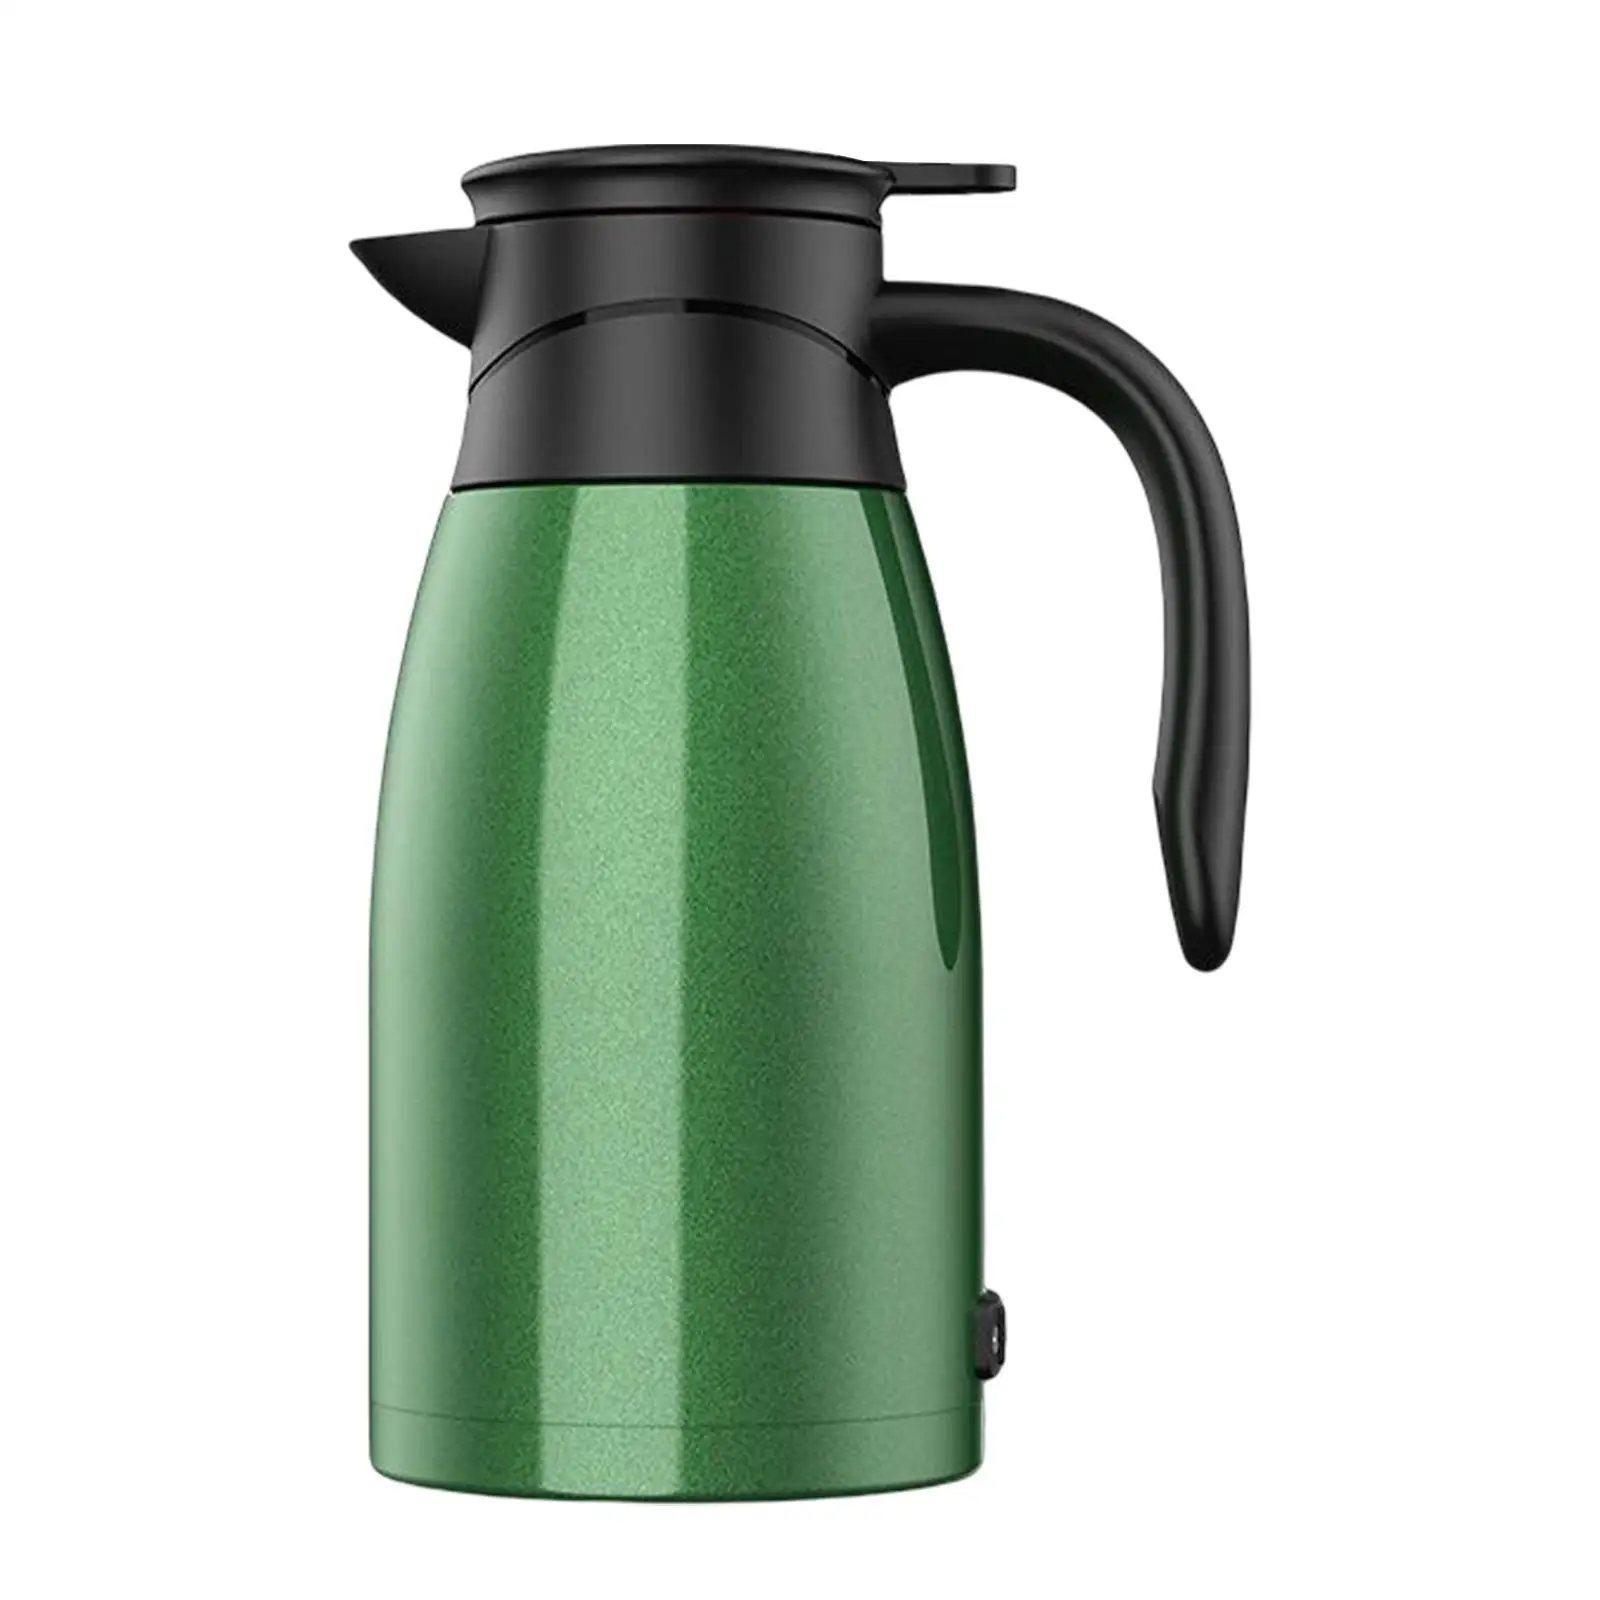 Portable 24V Car Truck Kettle Boiler Warmer Temp Display Hot Water Kettle Heating Cup for Tea Coffee Milk Water Travel